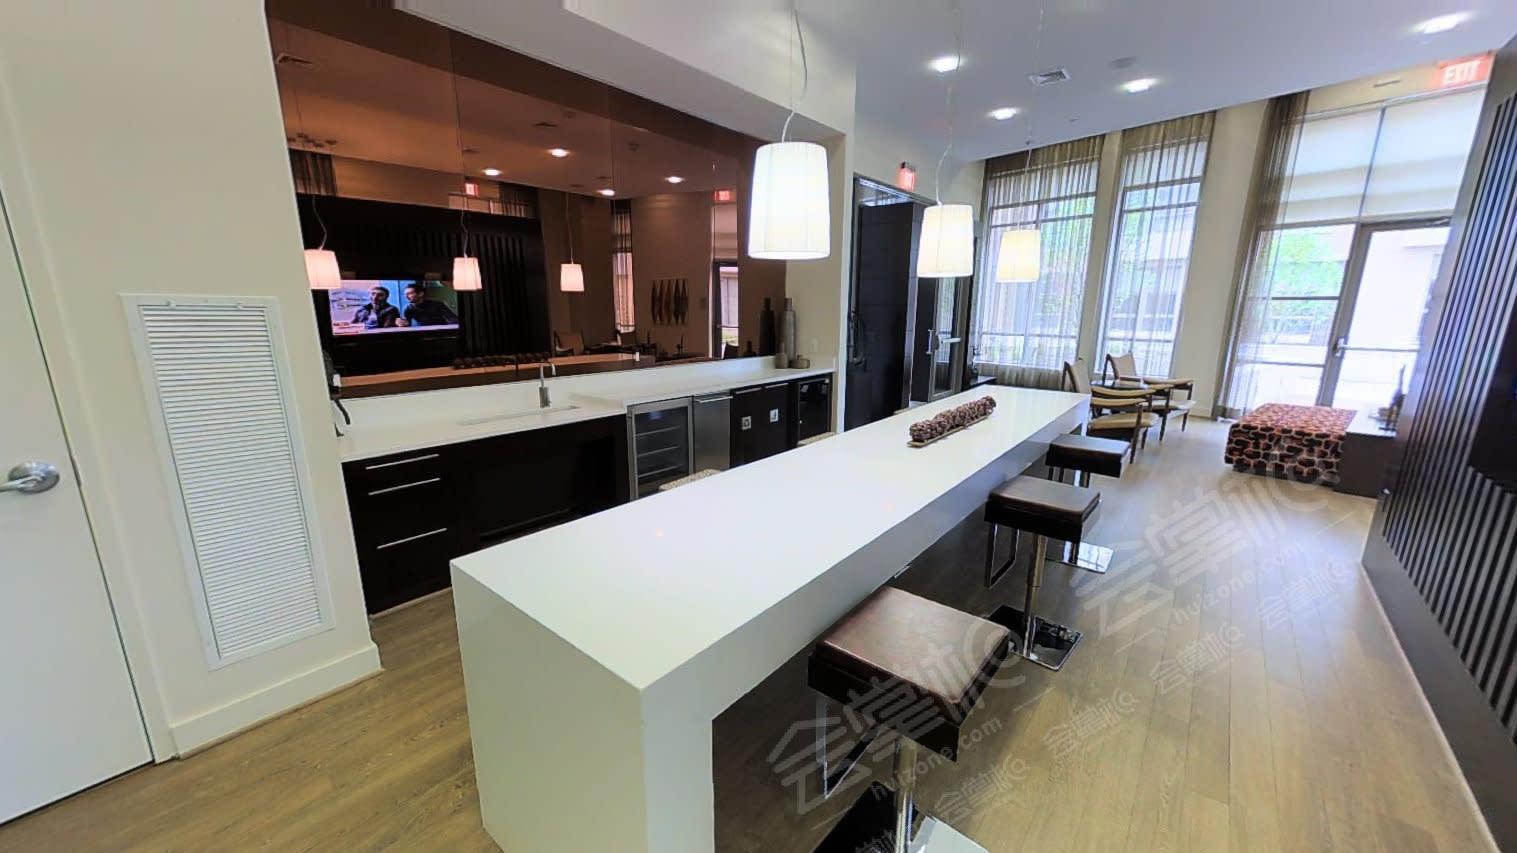 Perfect Event Space w/ Ample Seating & Kitchenette!